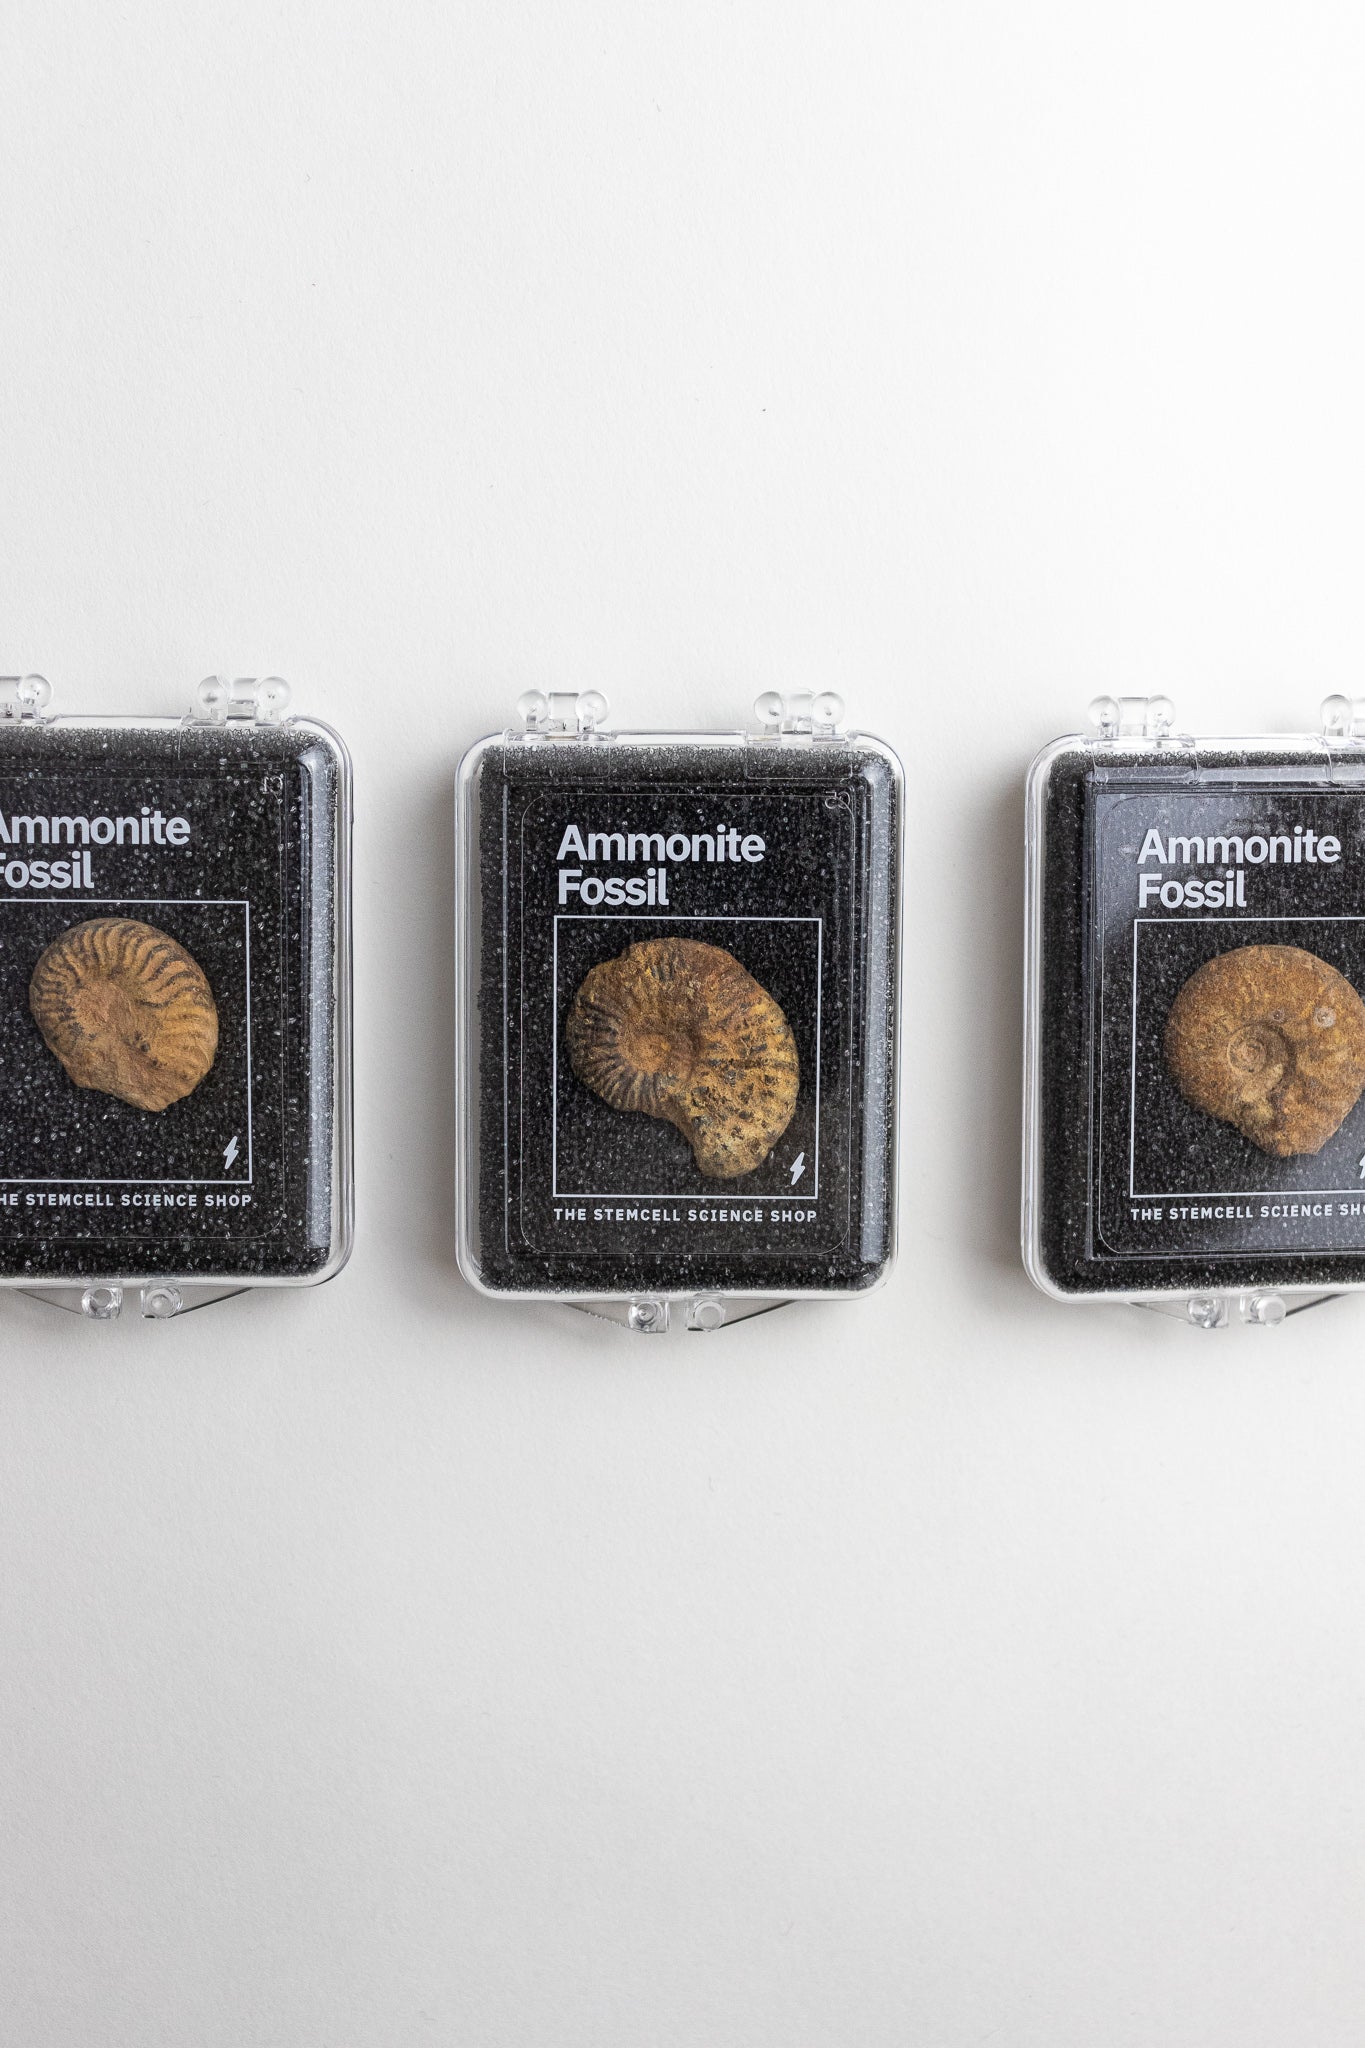 Ammonite Fossil - Stemcell Science Shop